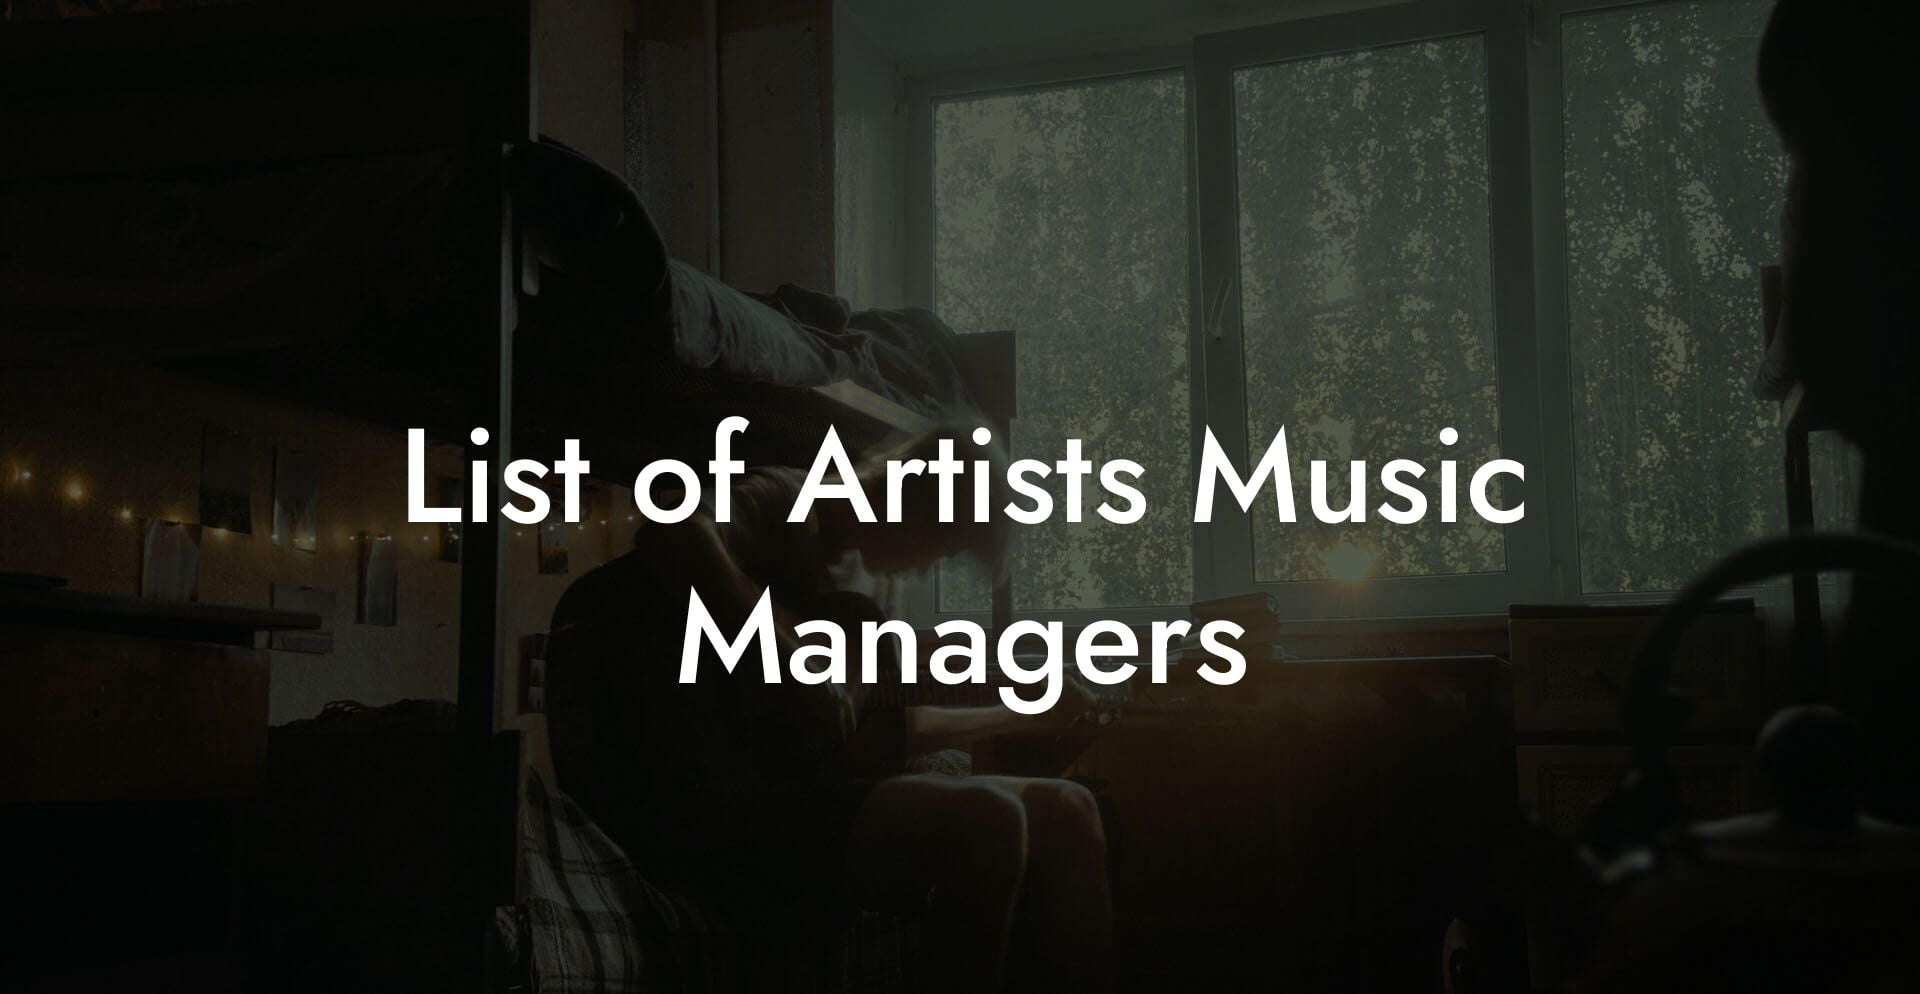 List of Artists Music Managers